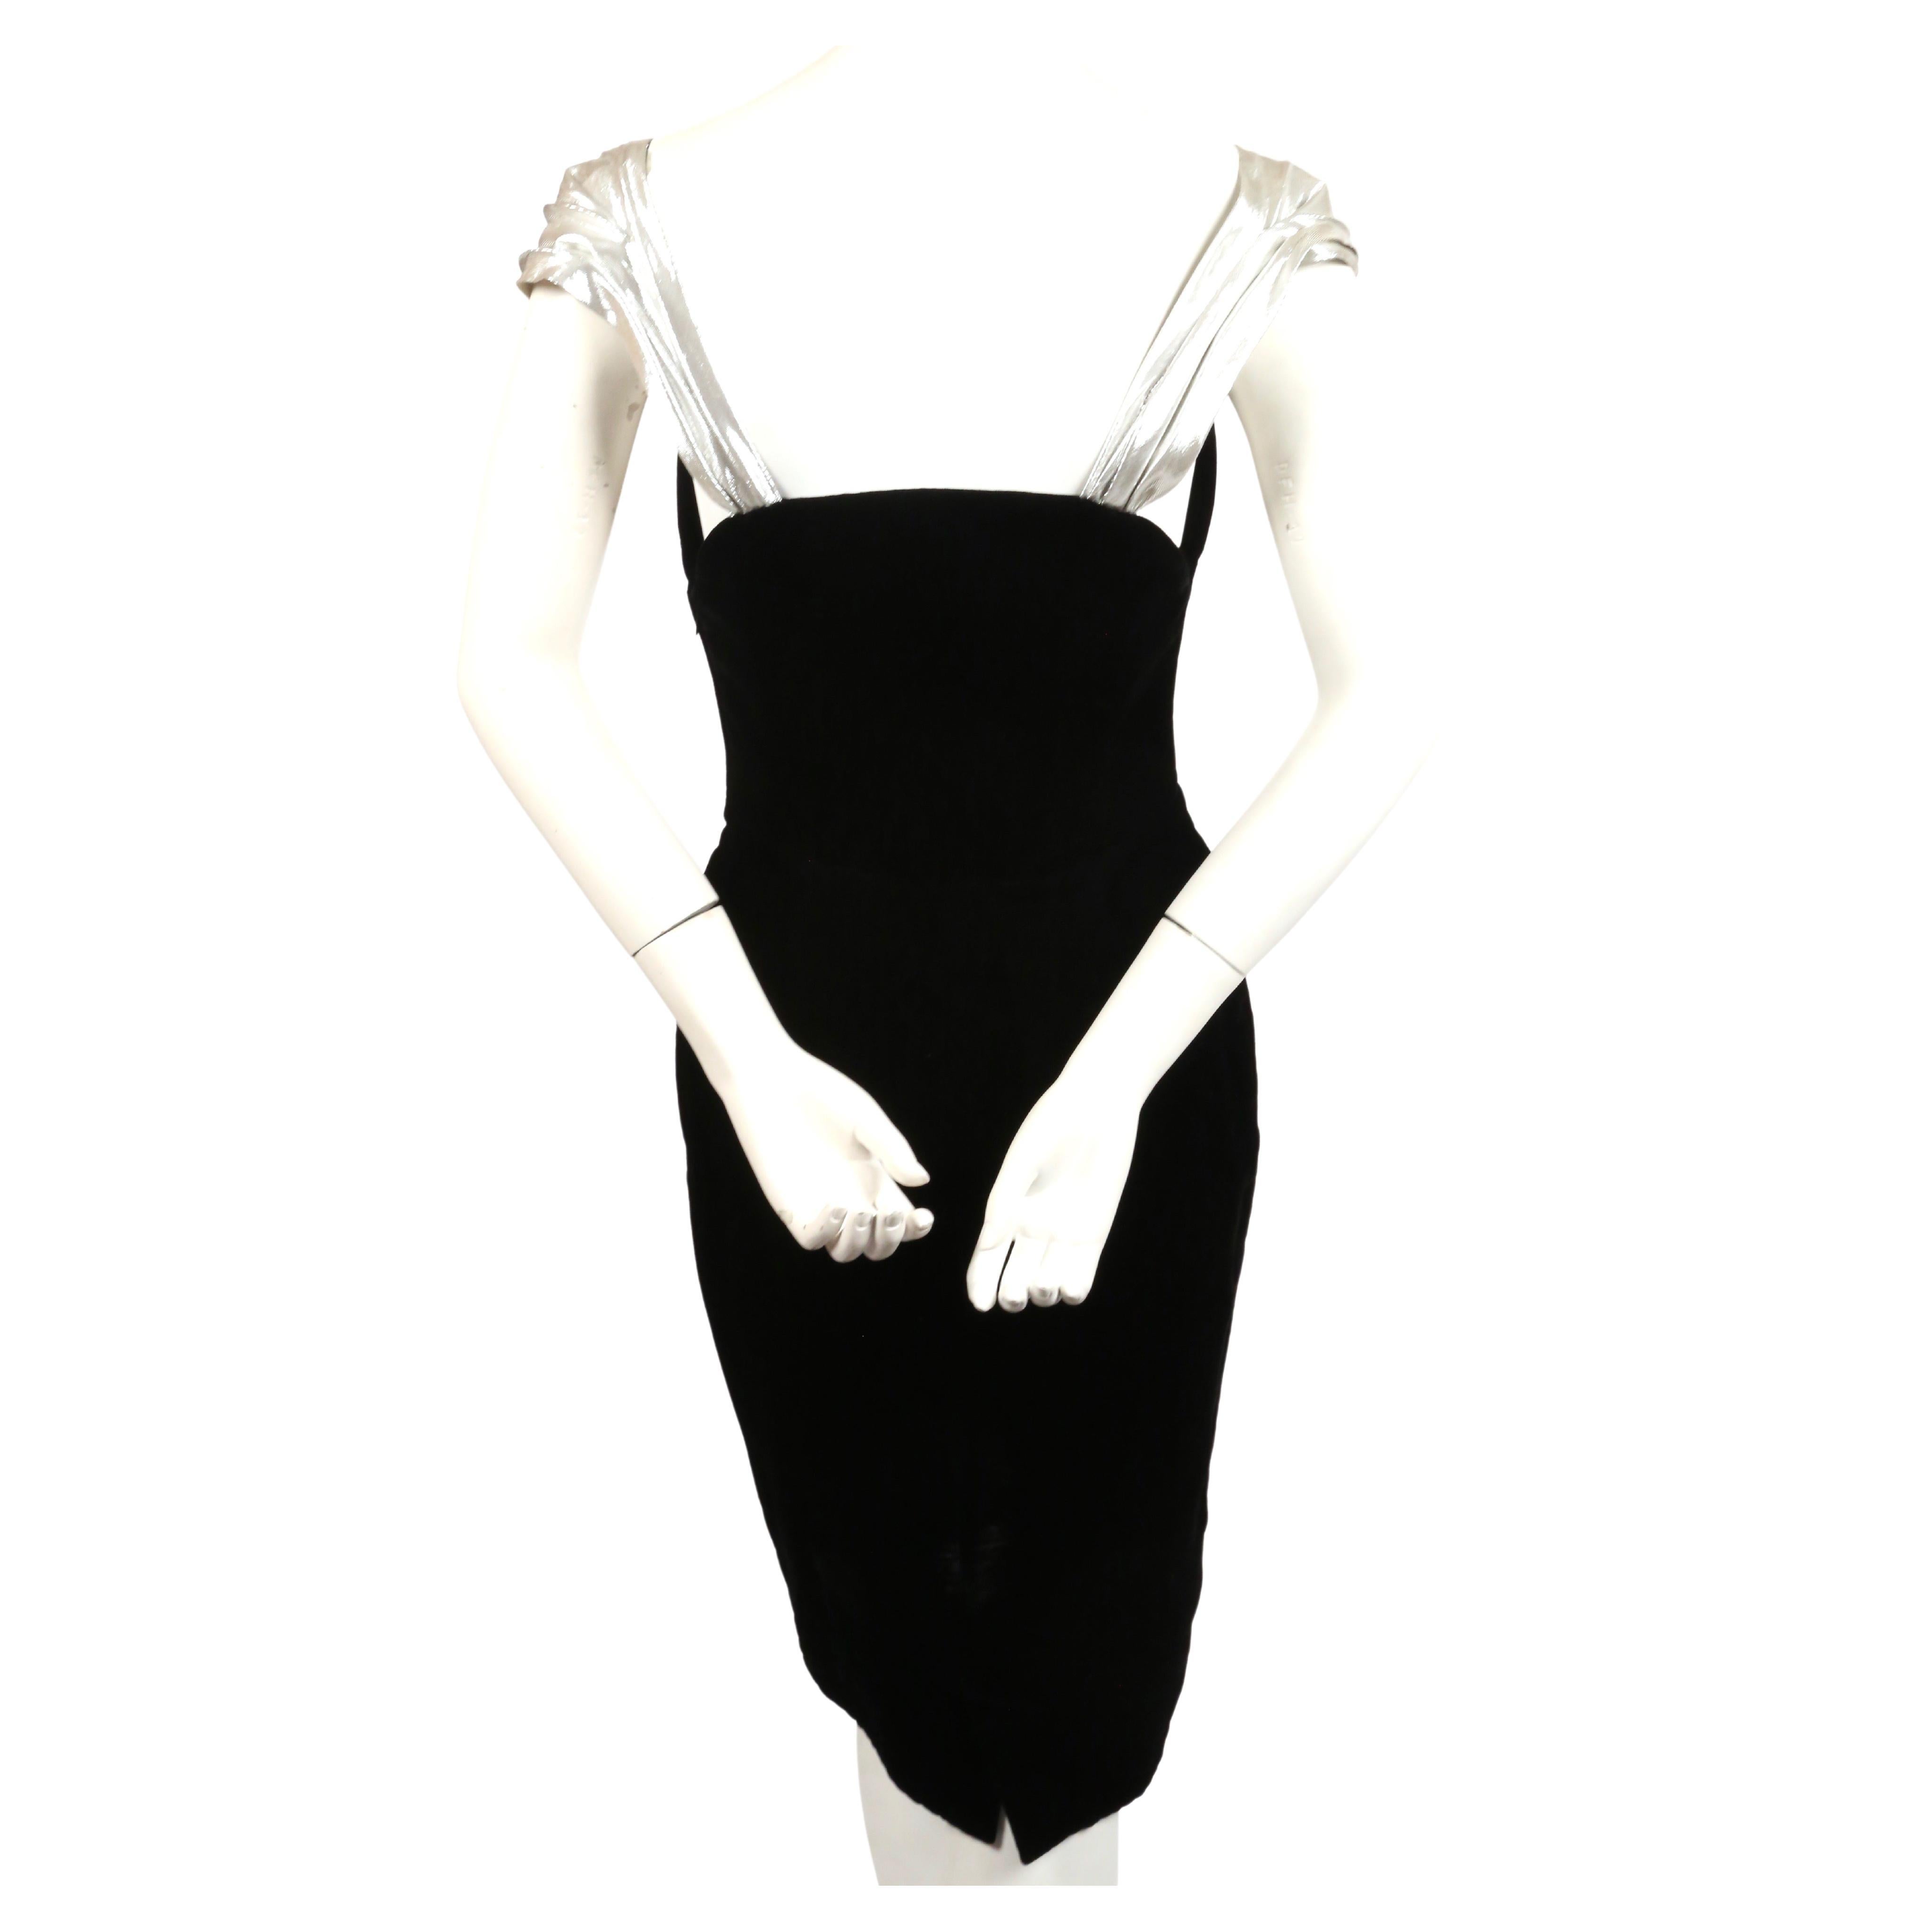 Very rare and dramatic, black velvet dress with shaped 'winged' wire bodice and silver lame detail from Thierry Mugler dating to the 1990's. Neckline wires are adjustable. Dress has a very flattering cut. French size 38. Approximate measurements: